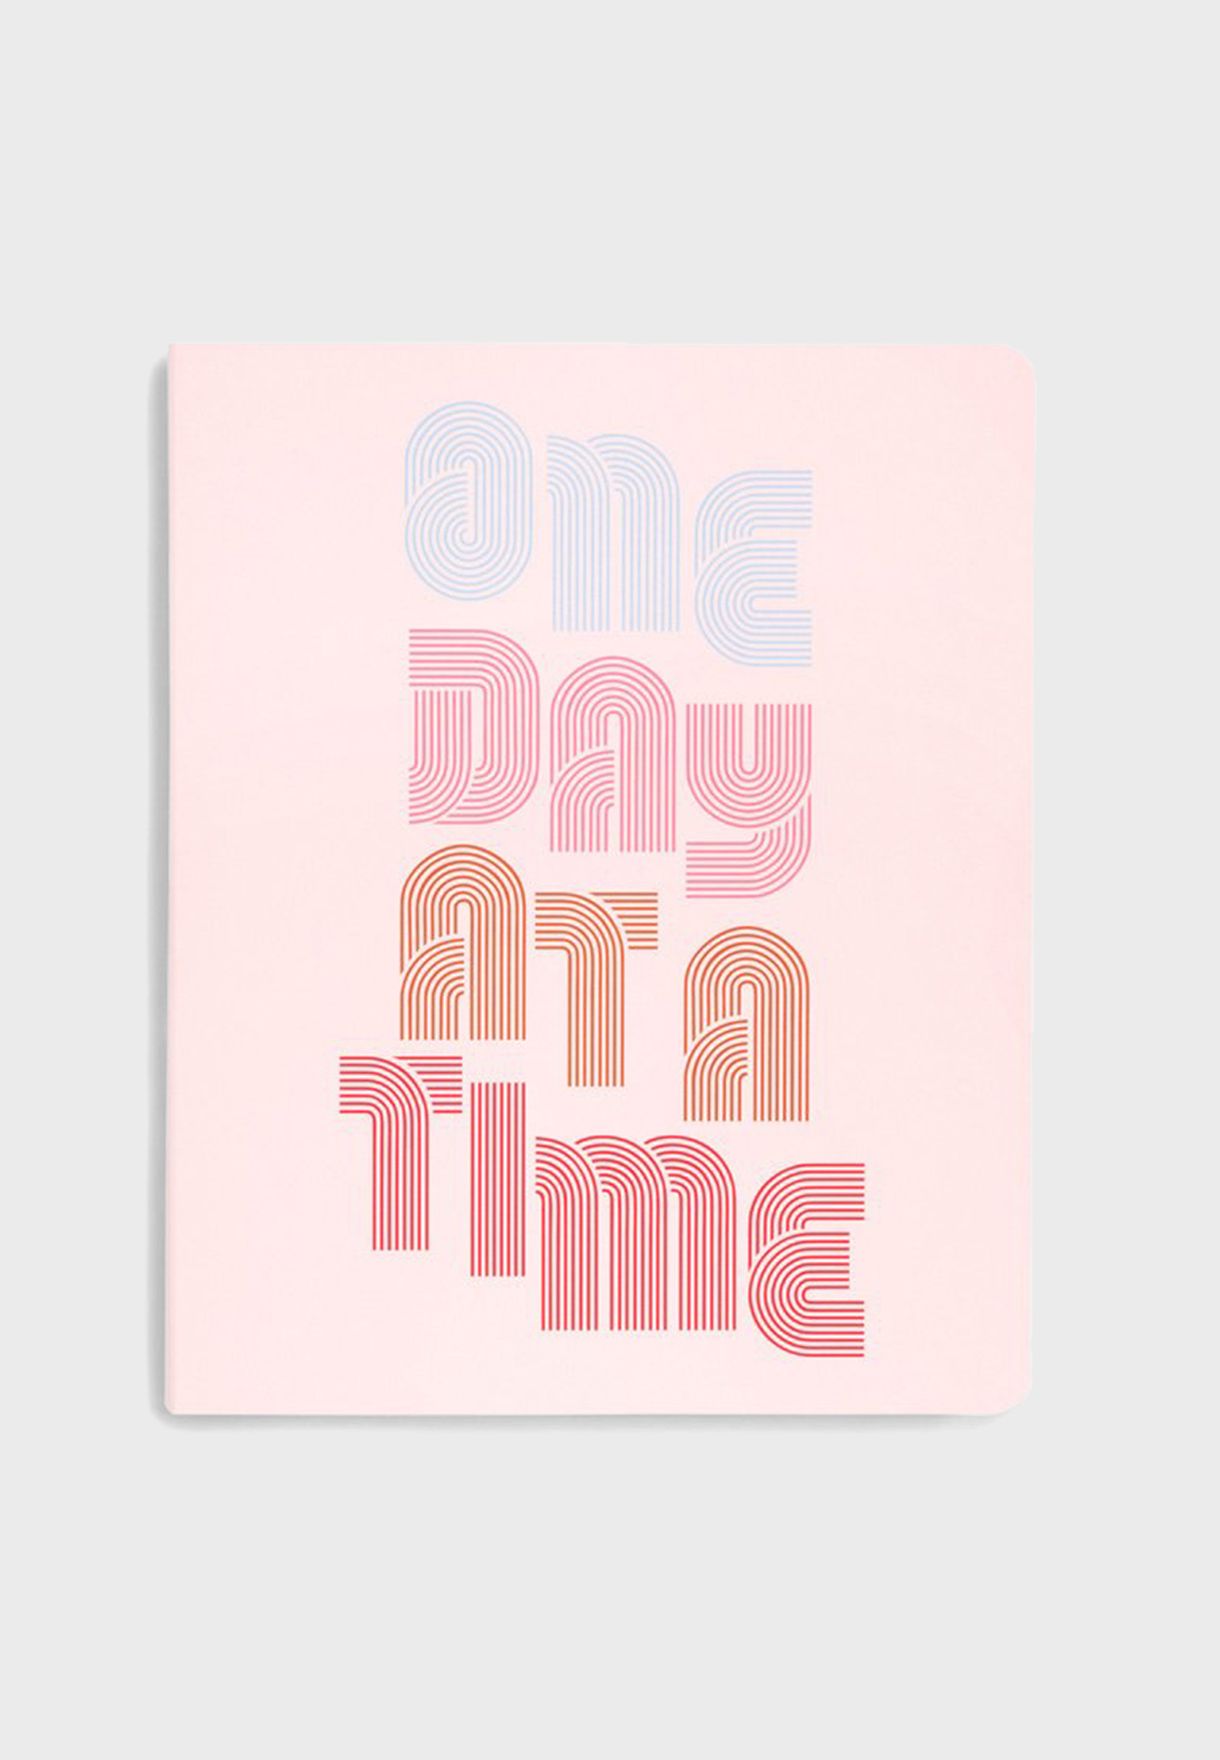 One Day At A Time To Do Planner